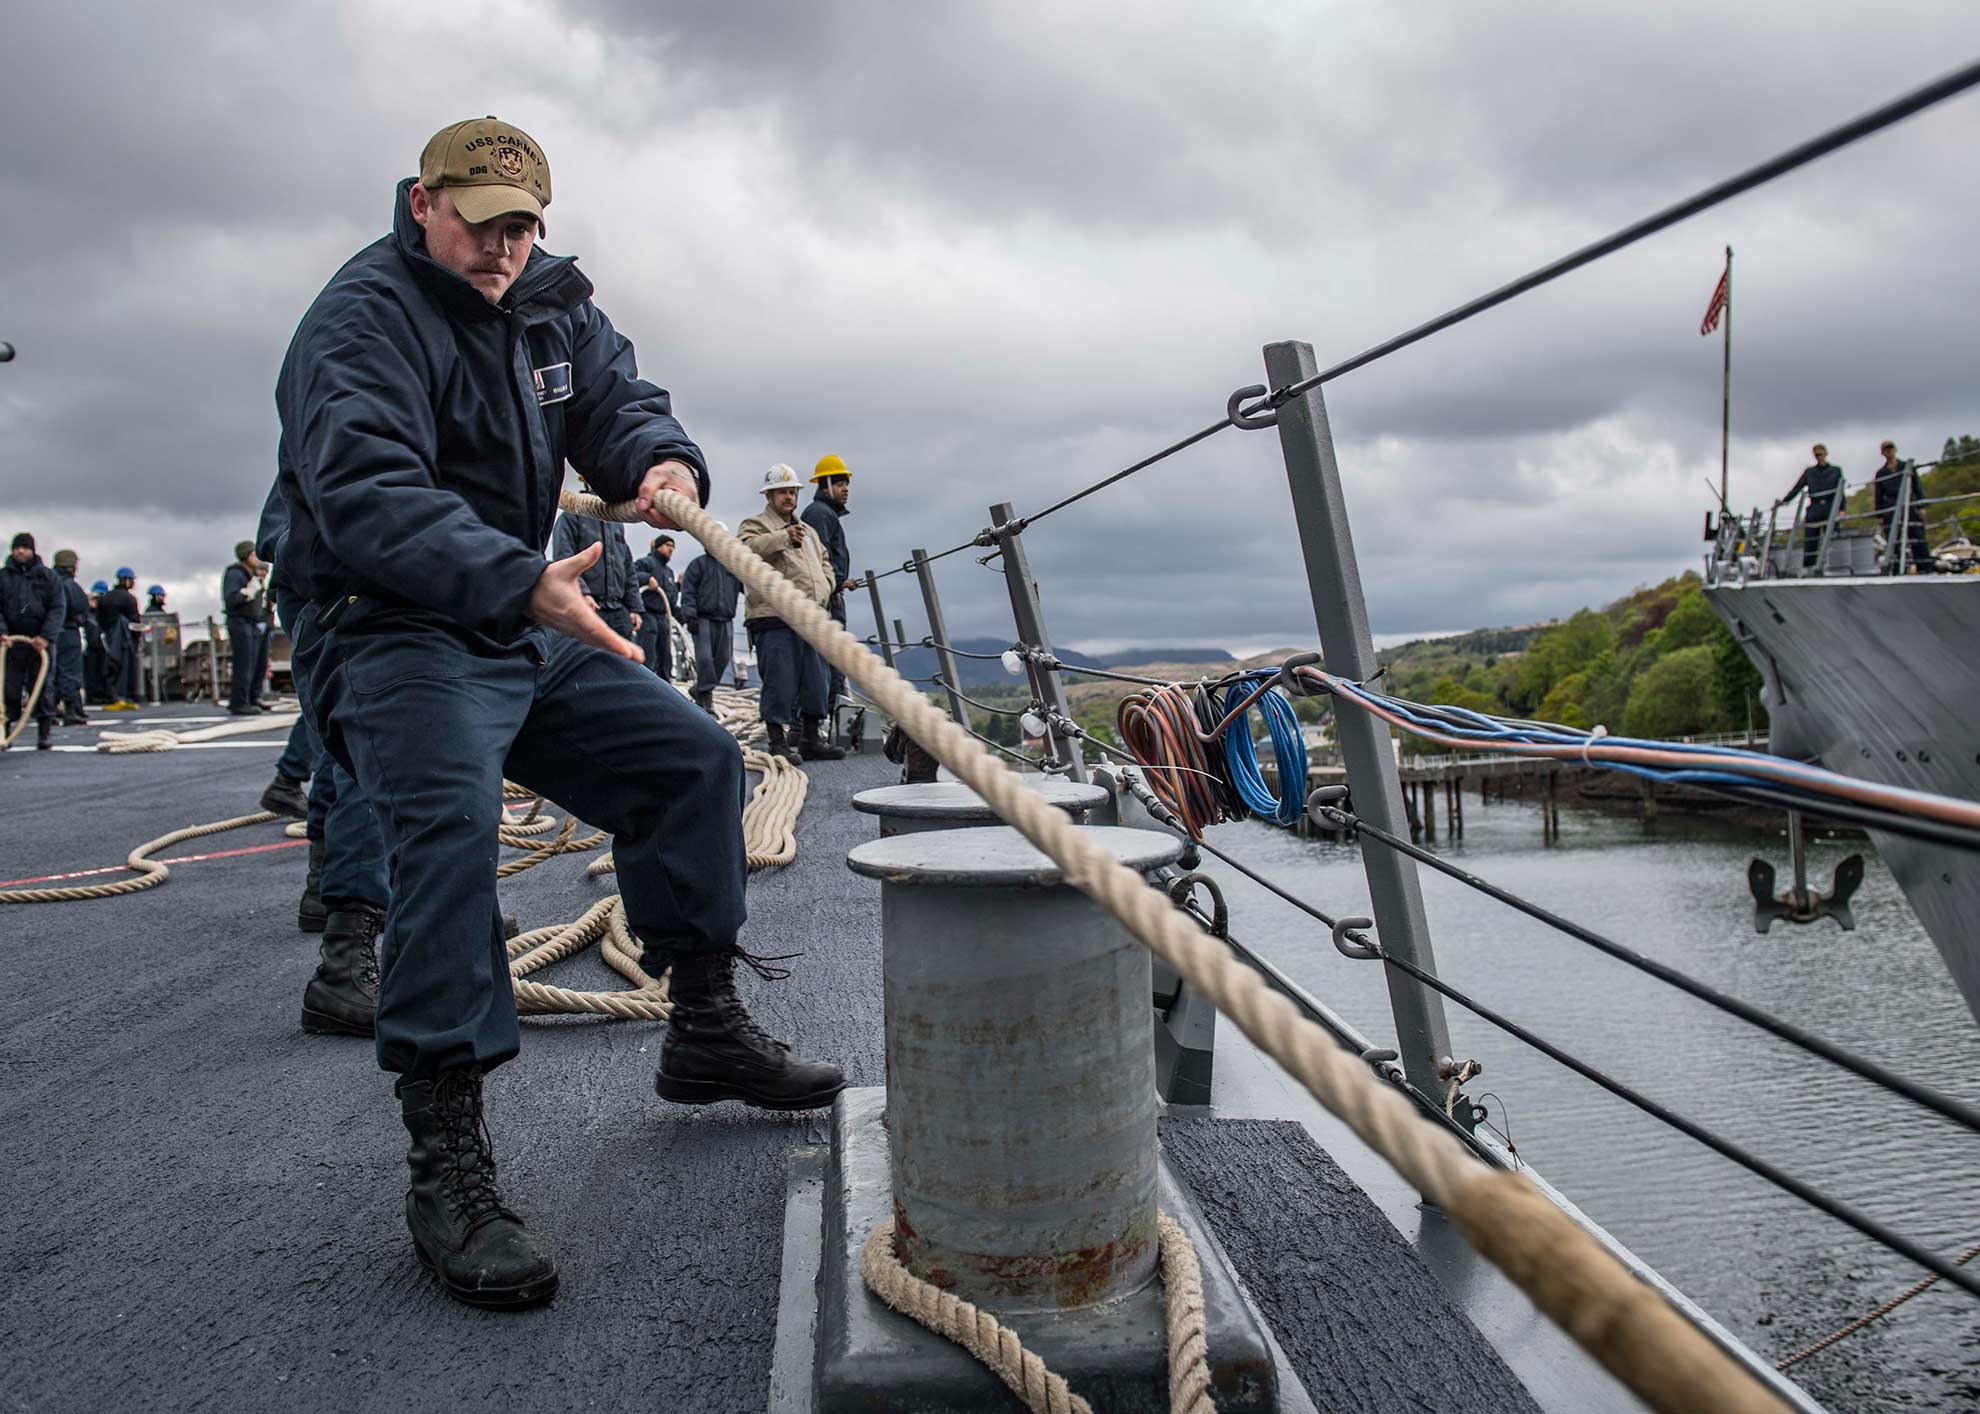 Scotland (May 8, 2019) Boatswain's Mate Seaman Timothy Mallon, from Philadelphia, heaves in a mooring line after the Arleigh Burke-class guided-missile destroyer USS Carney (DDG 64) gets underway from Faslane, Scotland, to participate in Formidable Shield 19, May 8, 2019. Formidable Shield is designed to improve allied interoperability in a live-fire integrated air and missile defense environment, using NATO command and control reporting structures. (U.S. Navy photo by Mass Communication Specialist 1st Class Fred Gray IV. -